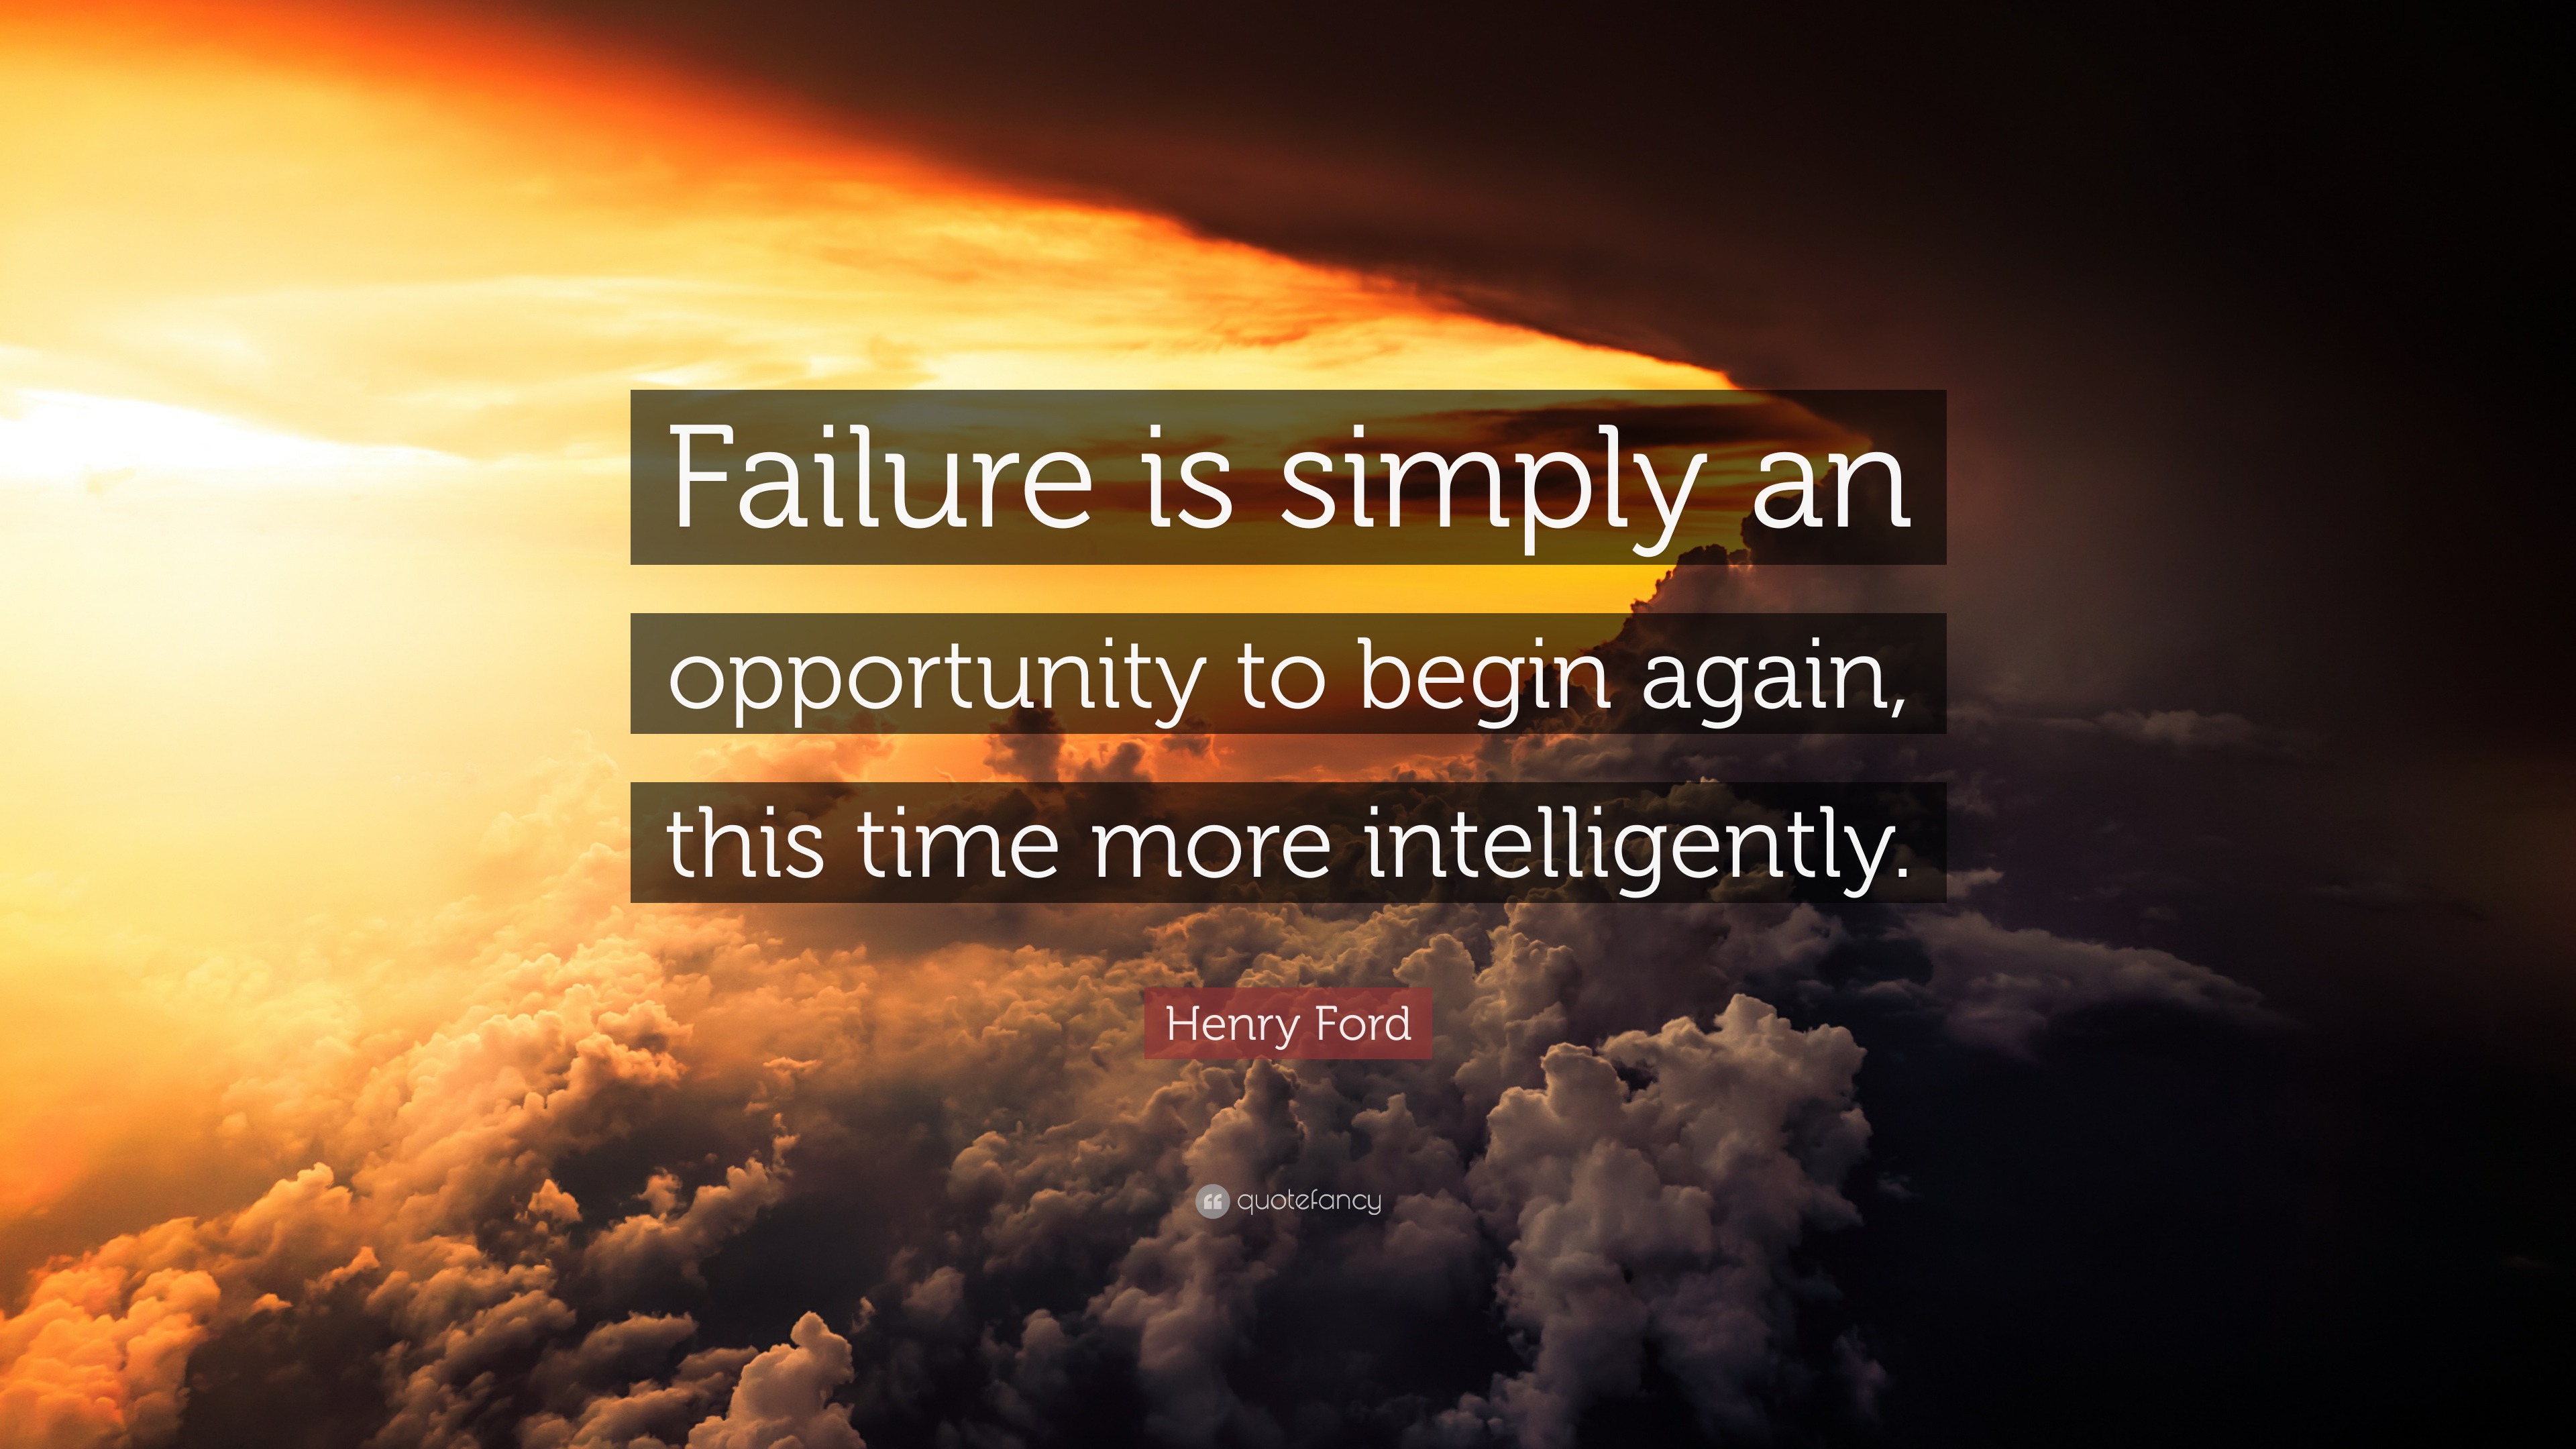 35+ Quotes About Failure And Trying Again